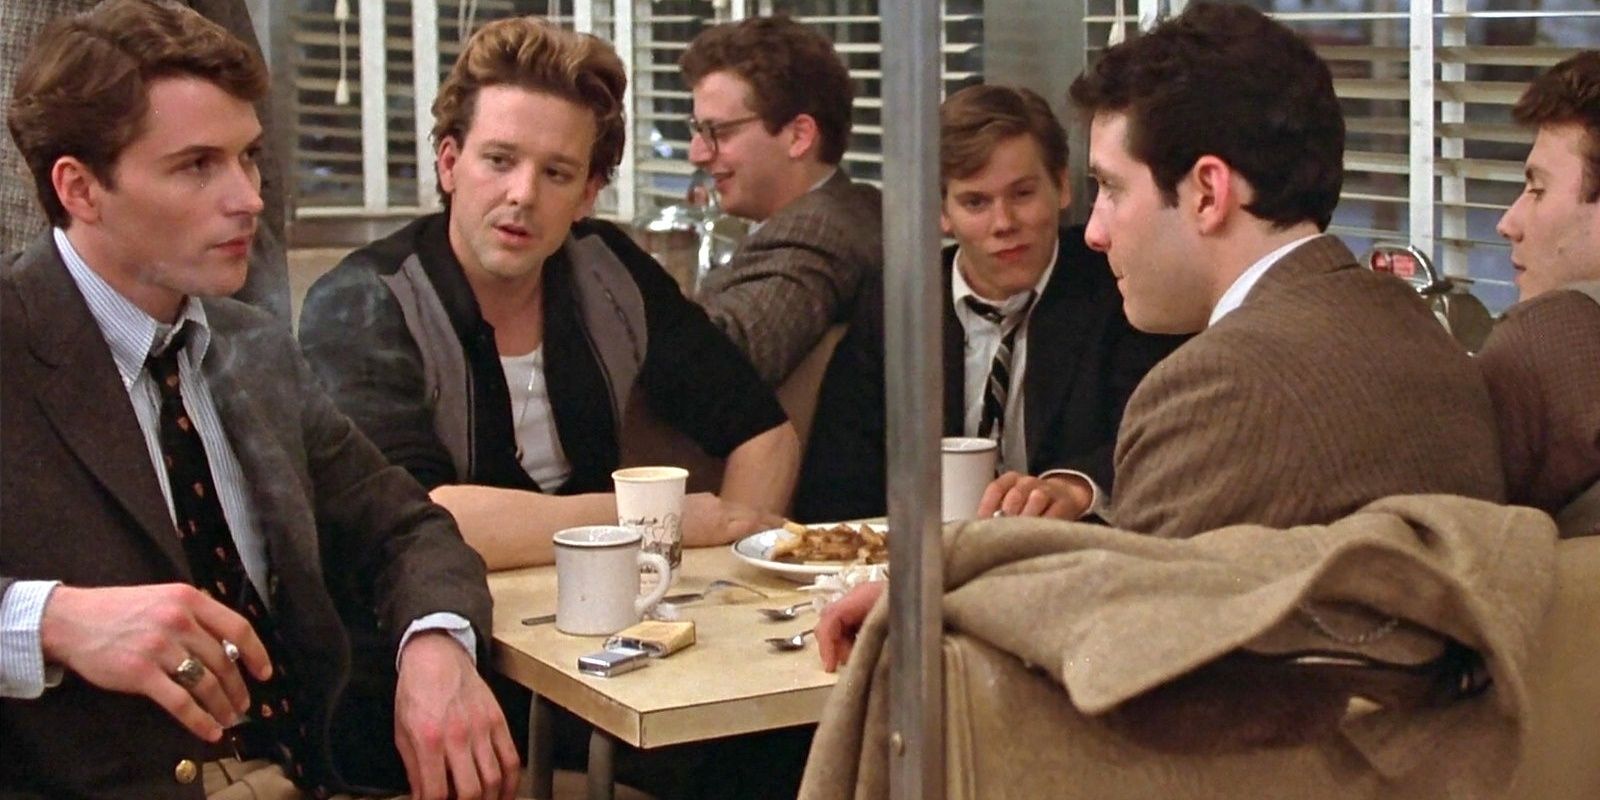 Mickey Rourke, Kevin Bacon, Daniel Stern at diner booth in Diner